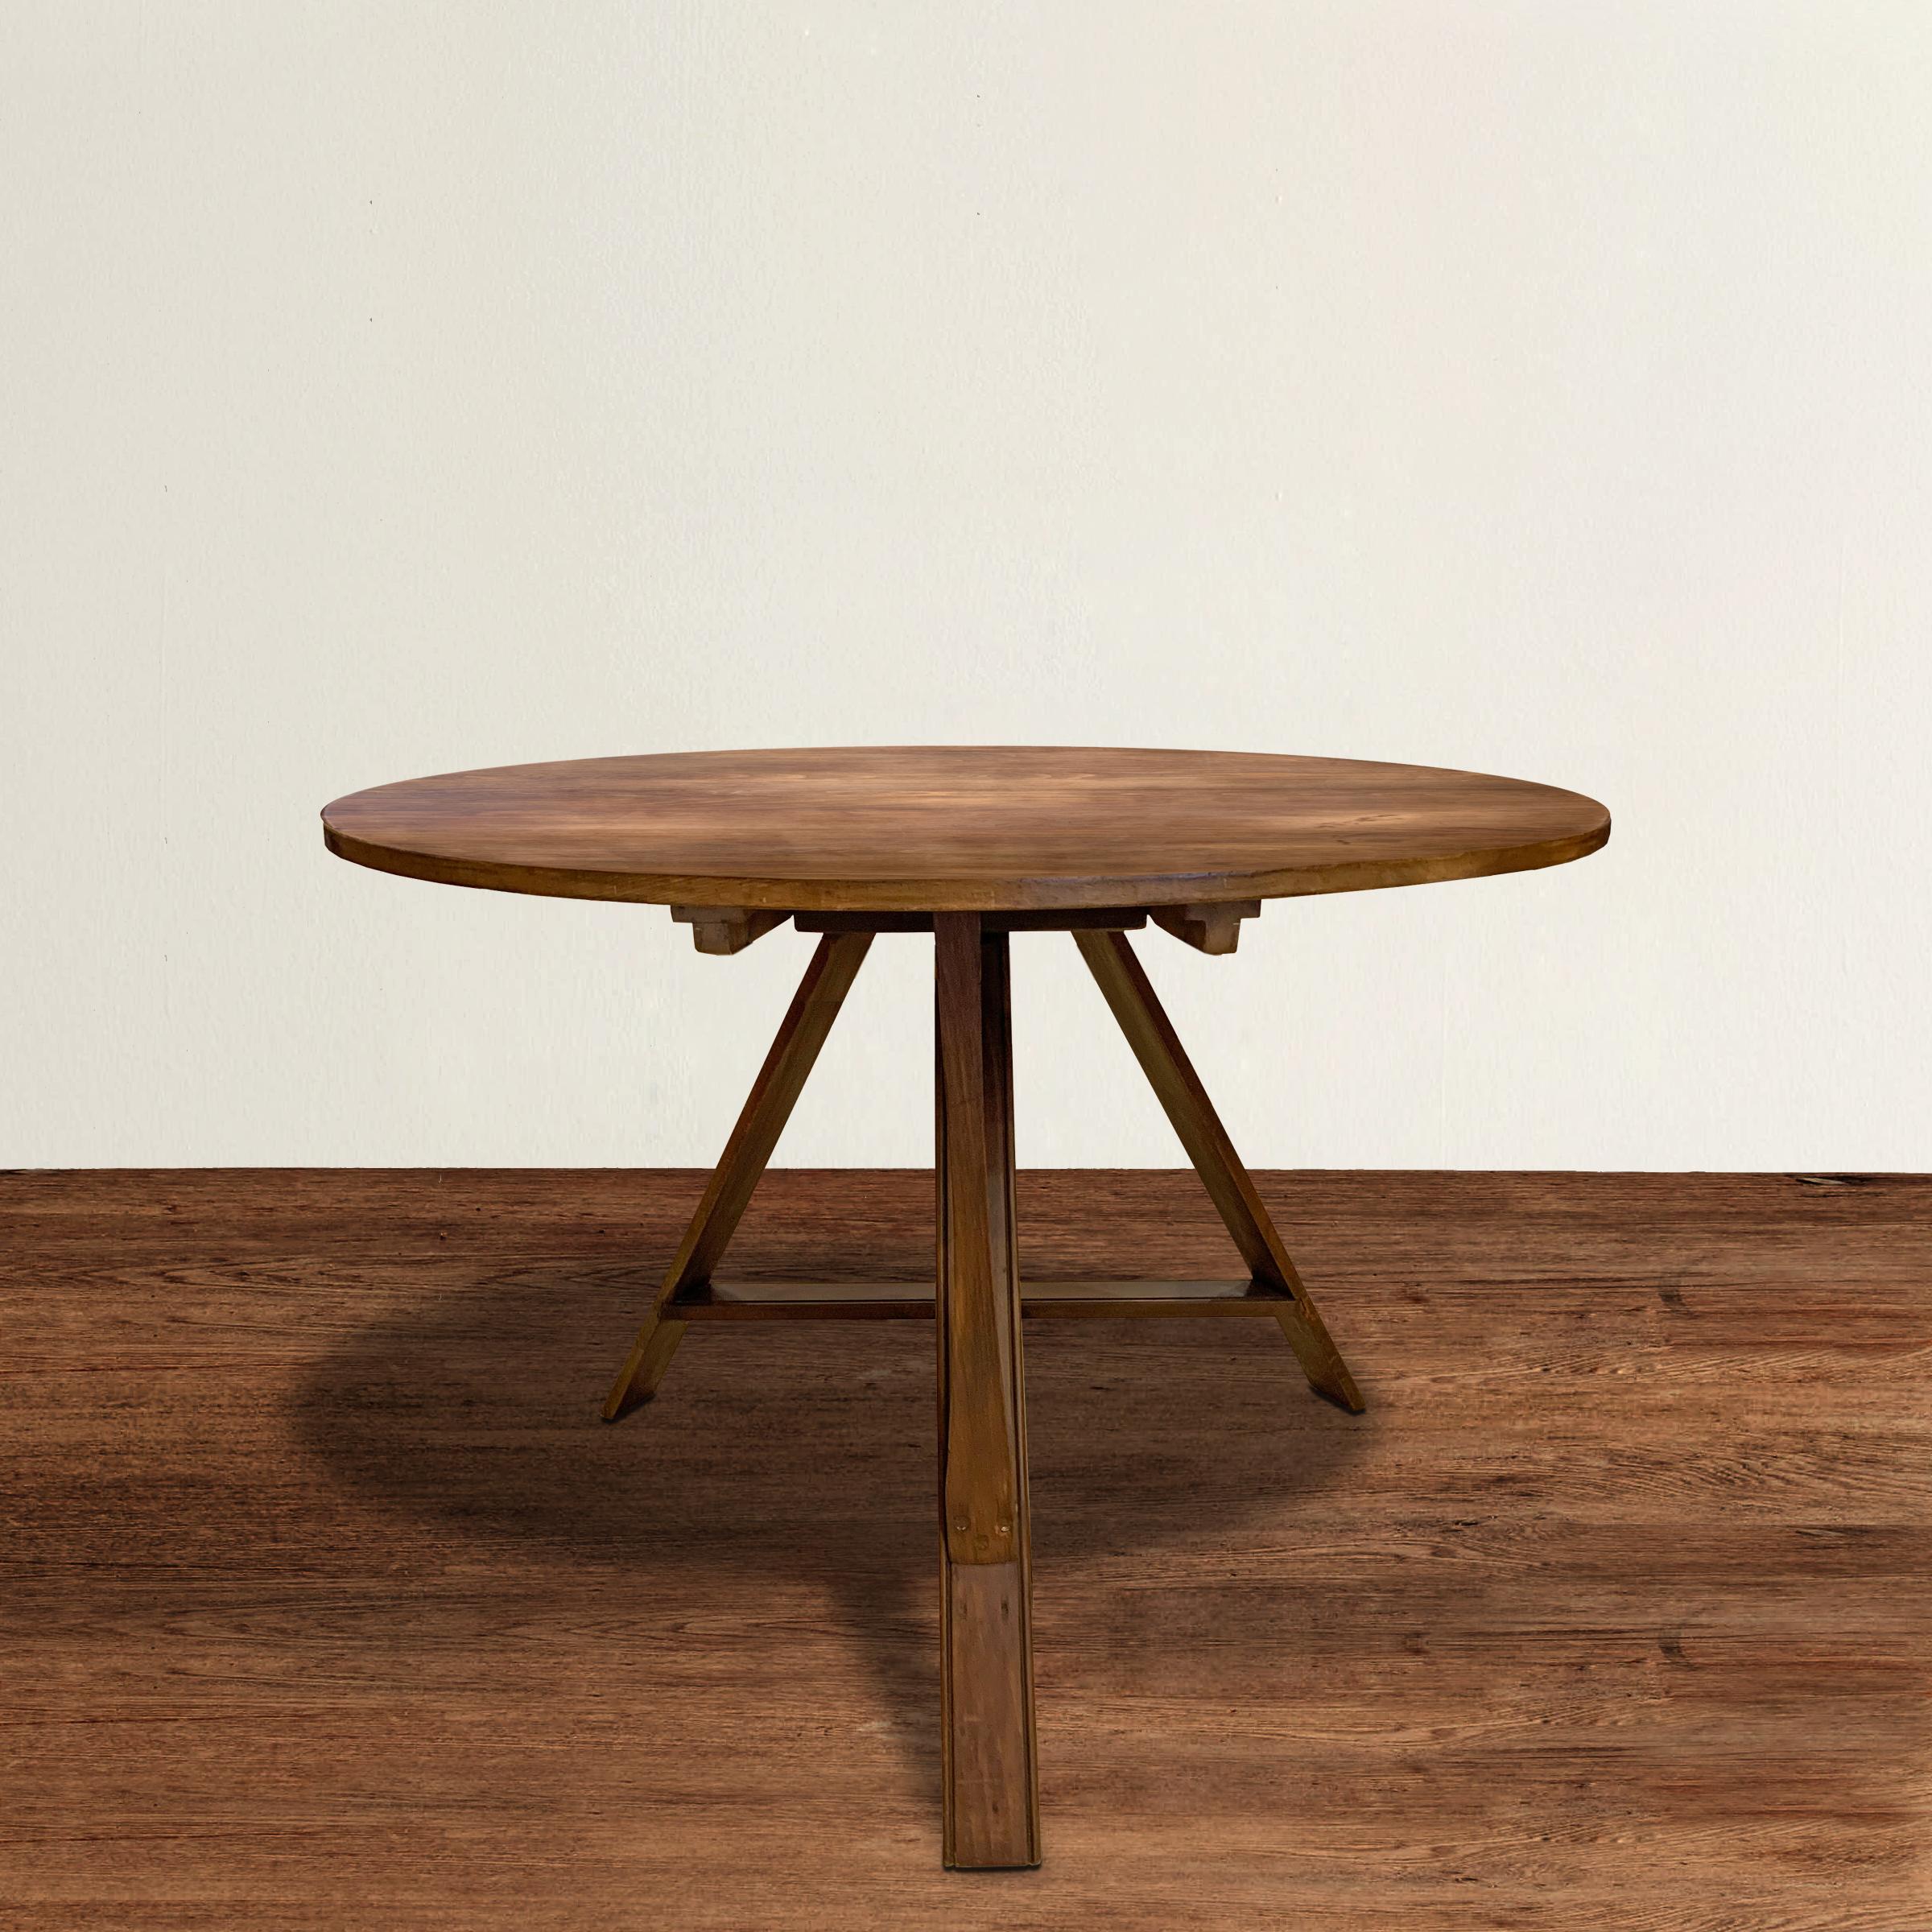 A beautiful Danish Mid-Century Modern round tilt-top table constructed from pine, and with three legs with carved beaded edges and trestle-style stretchers. Table is perfect for dining, a breakfast nook, or used as a side table next to a sofa or a